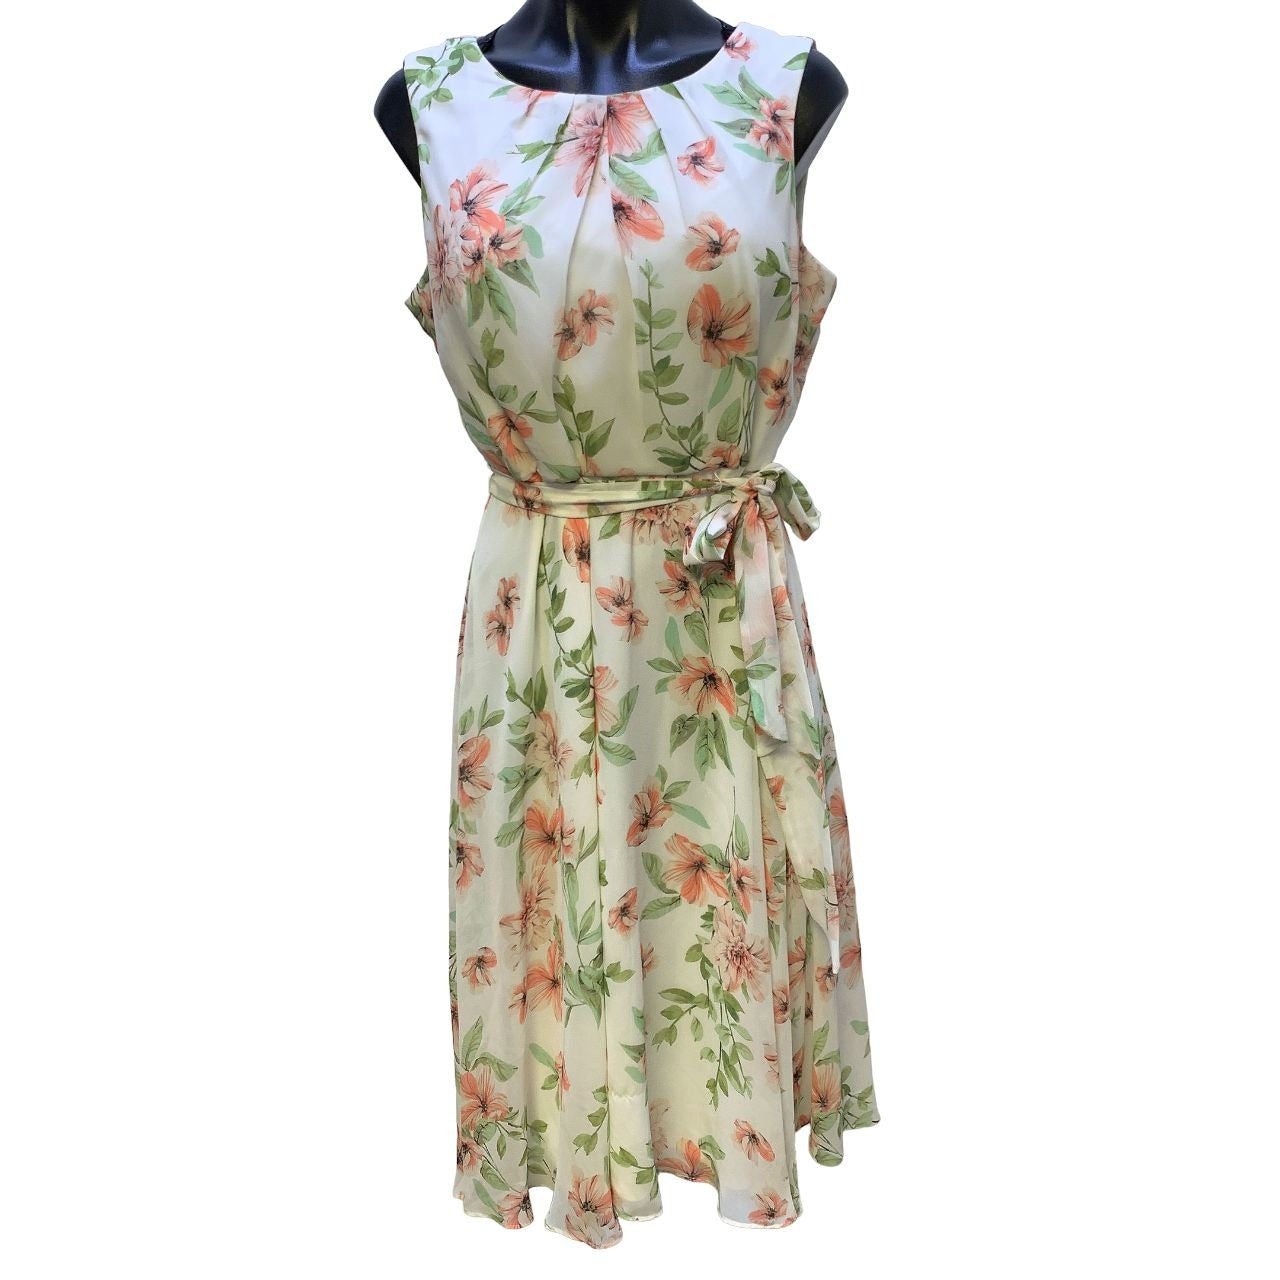 *Jessica Howard Ivory & Green Floral Print Dress Size 10P